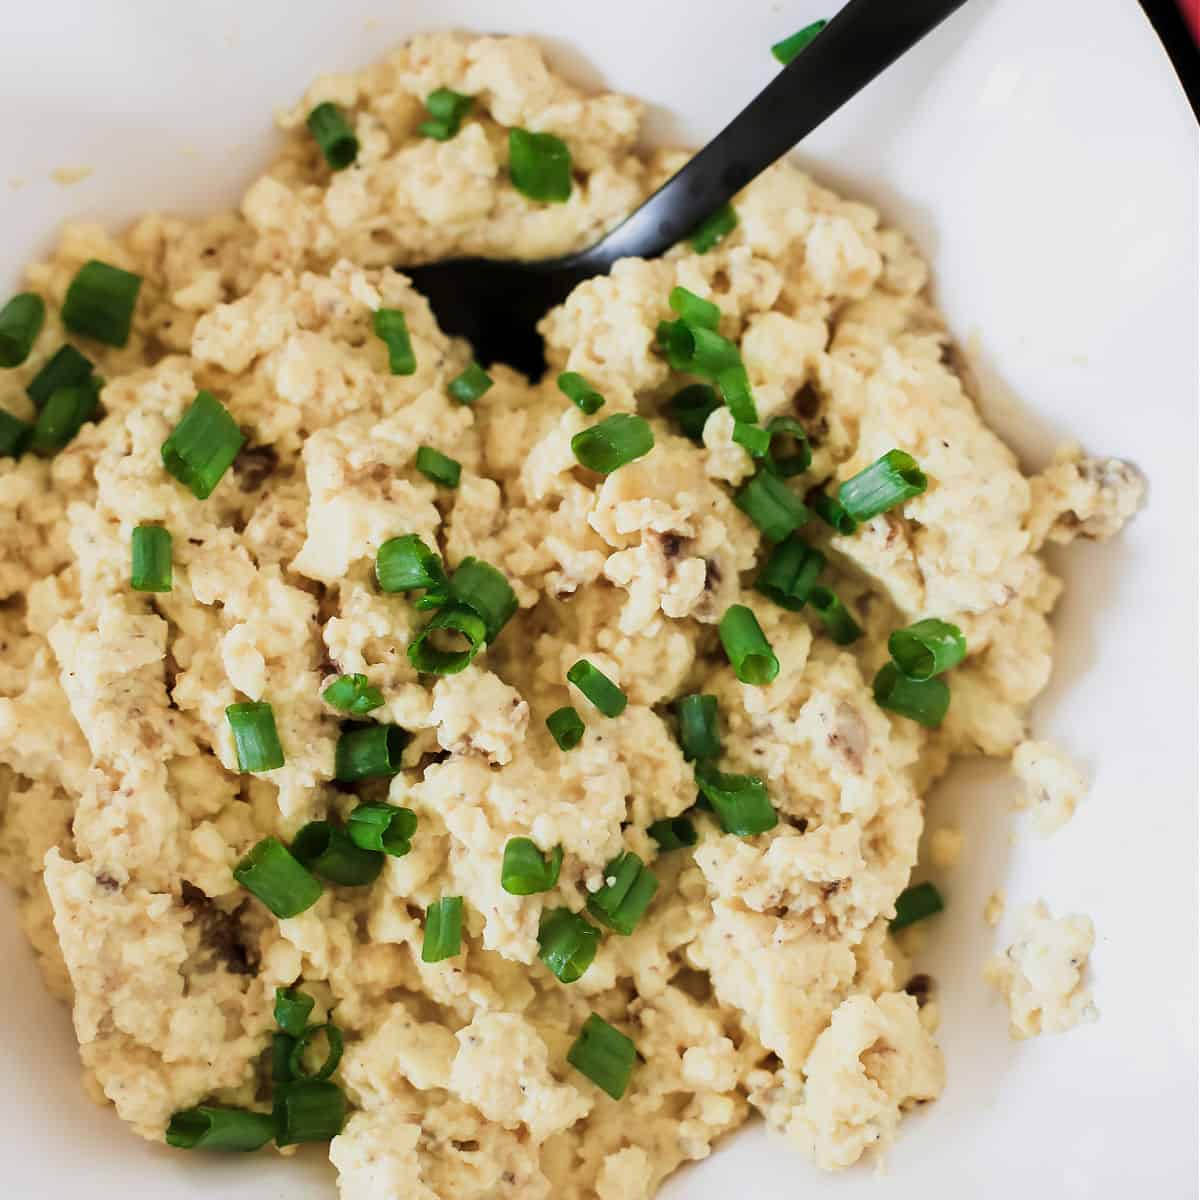 scrambled eggs brunch recipe with chives on top.